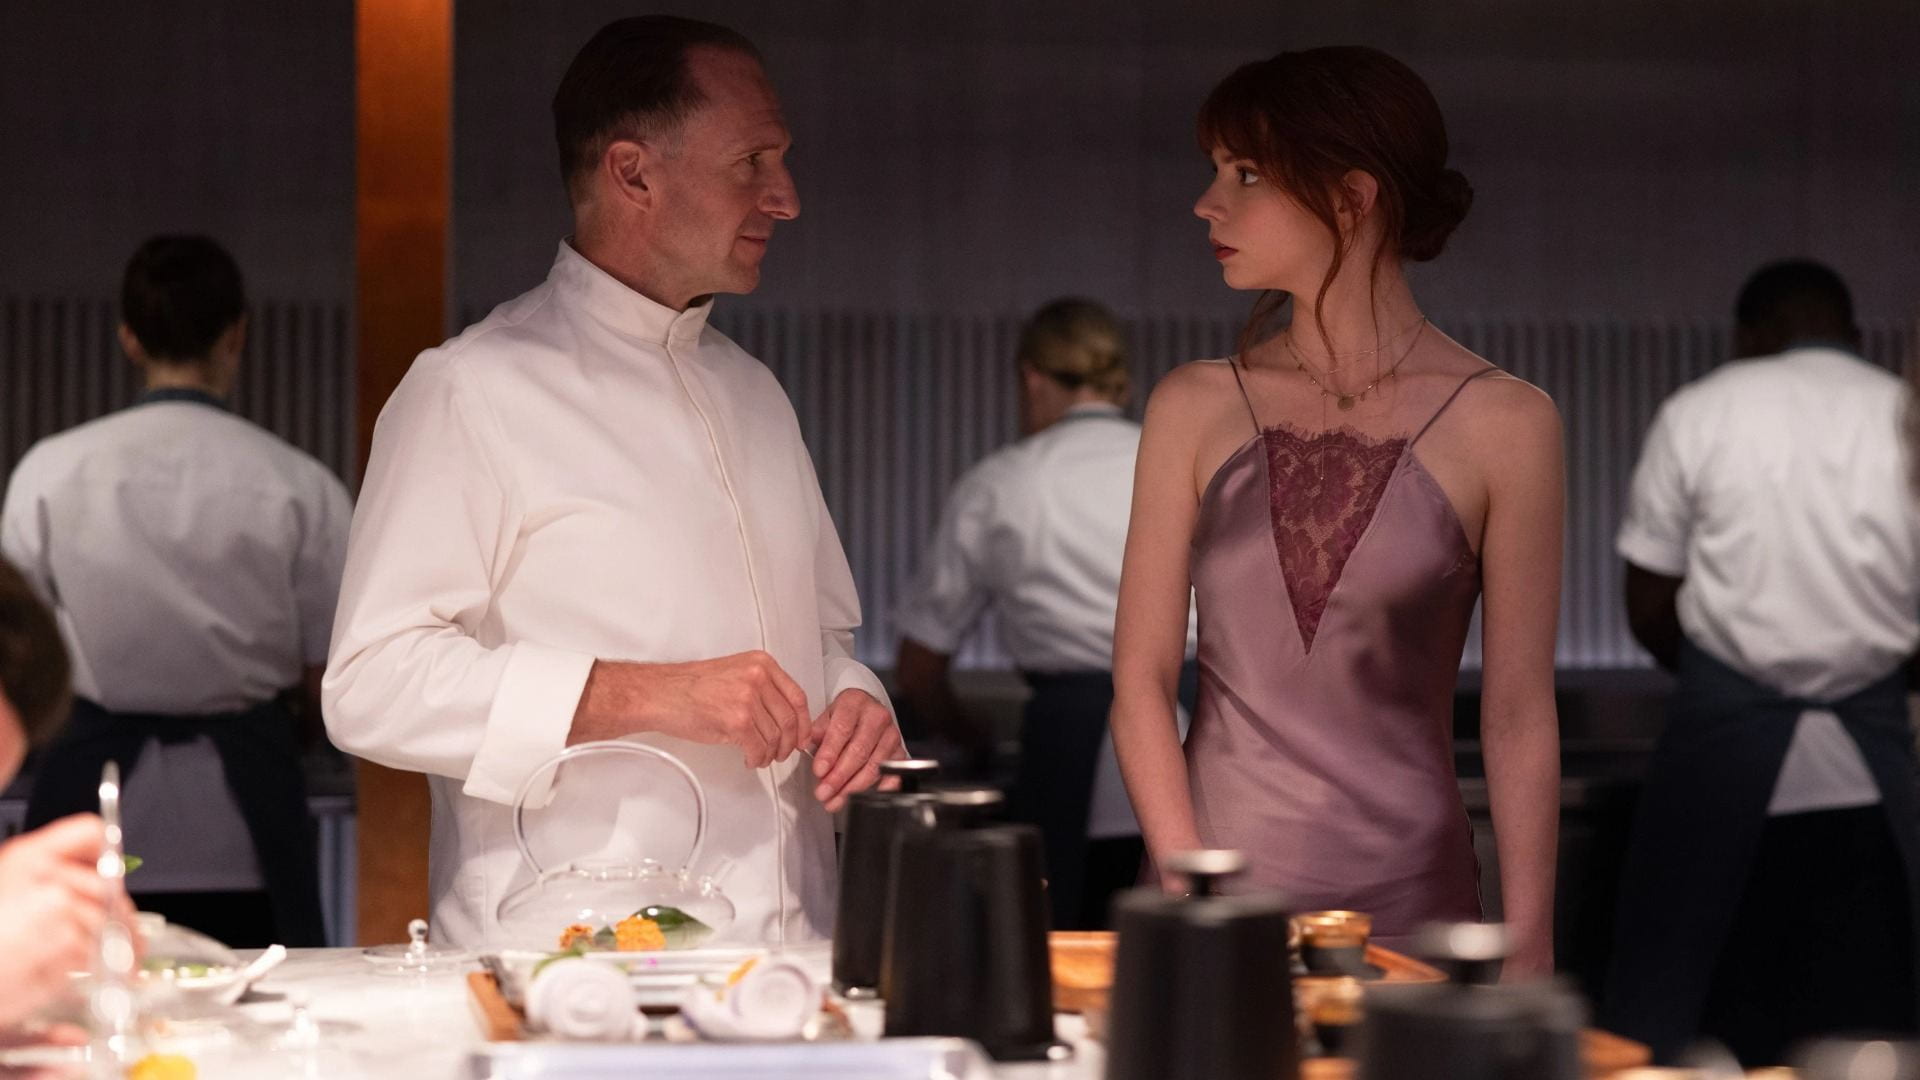 A man in a chef's uniform and a woman in a sleek dress look at each other in a busy kitchen